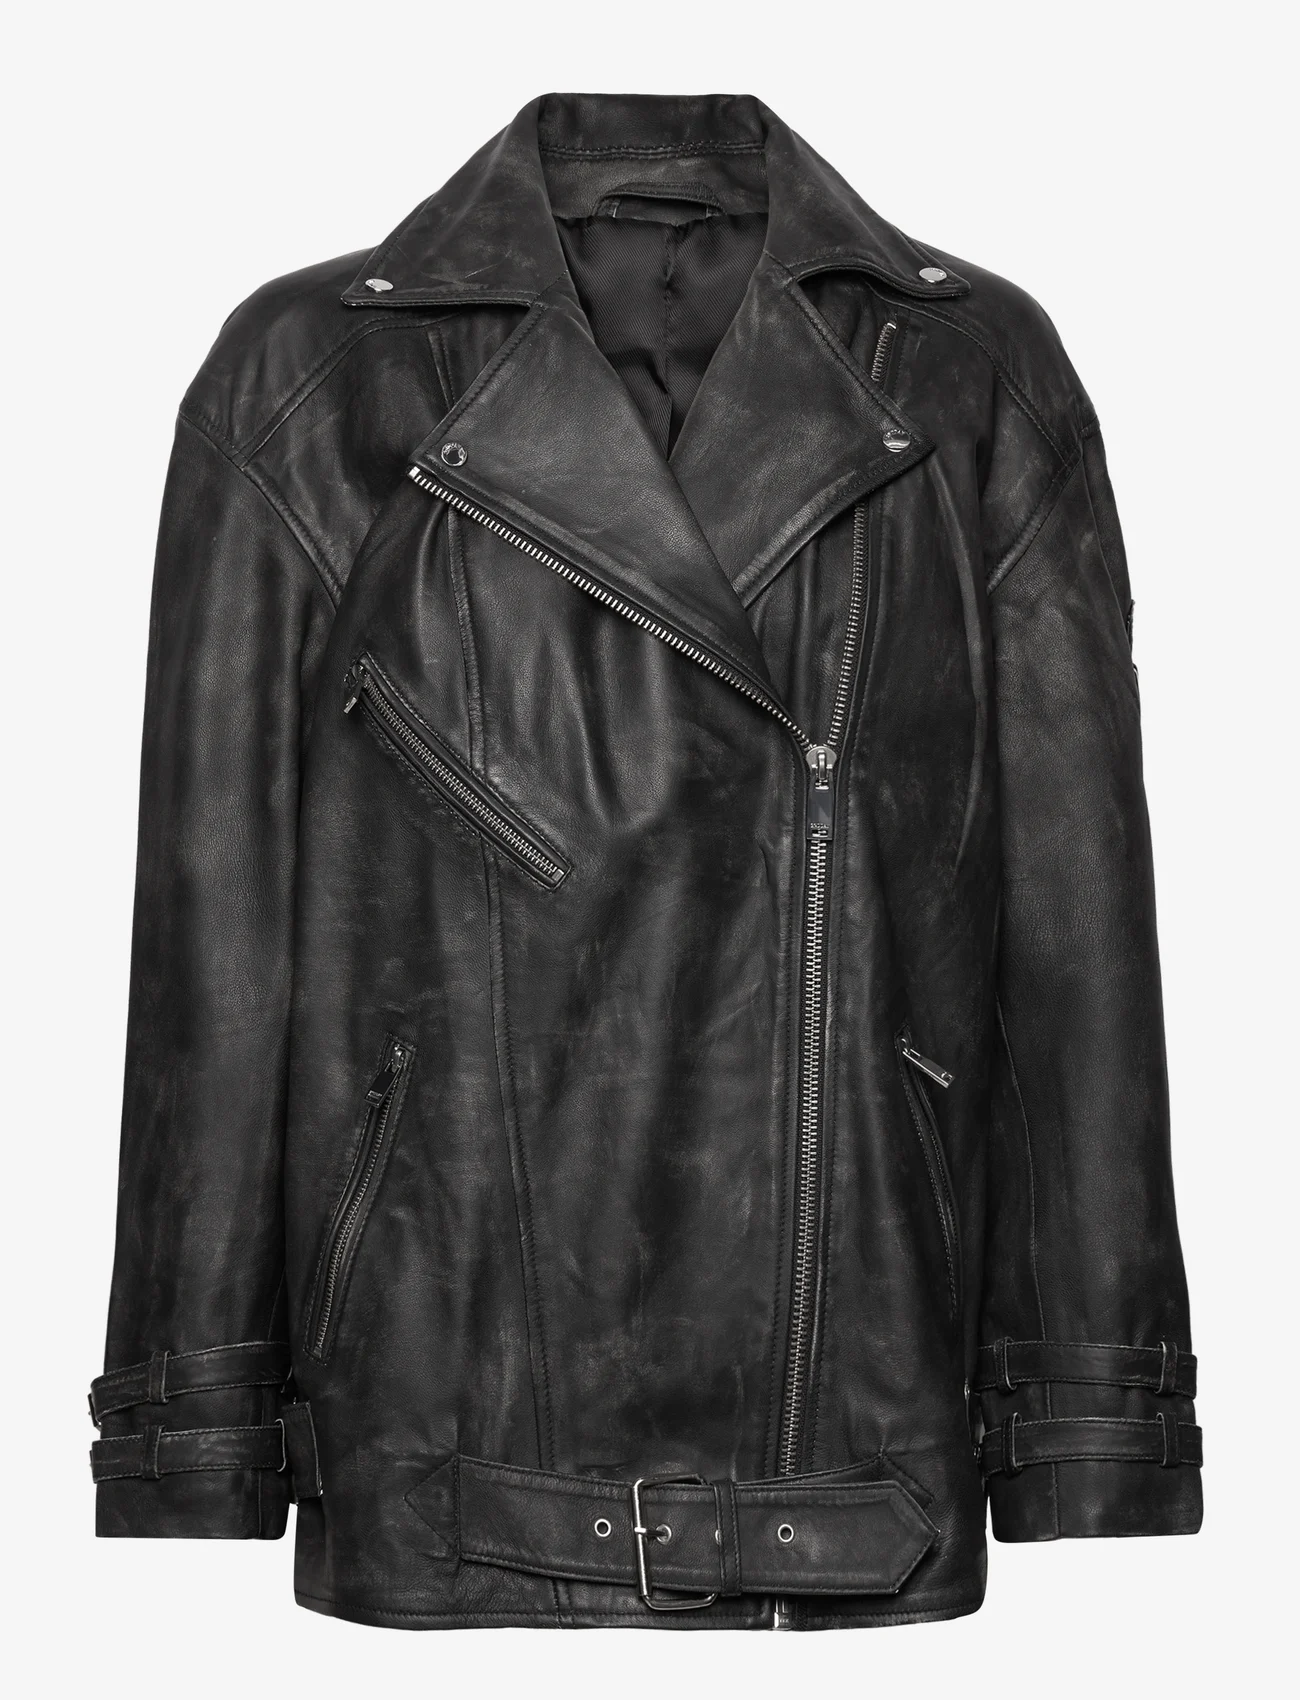 2NDDAY - 2ND Jagger - Uneven Leather - spring jackets - unblack - 1